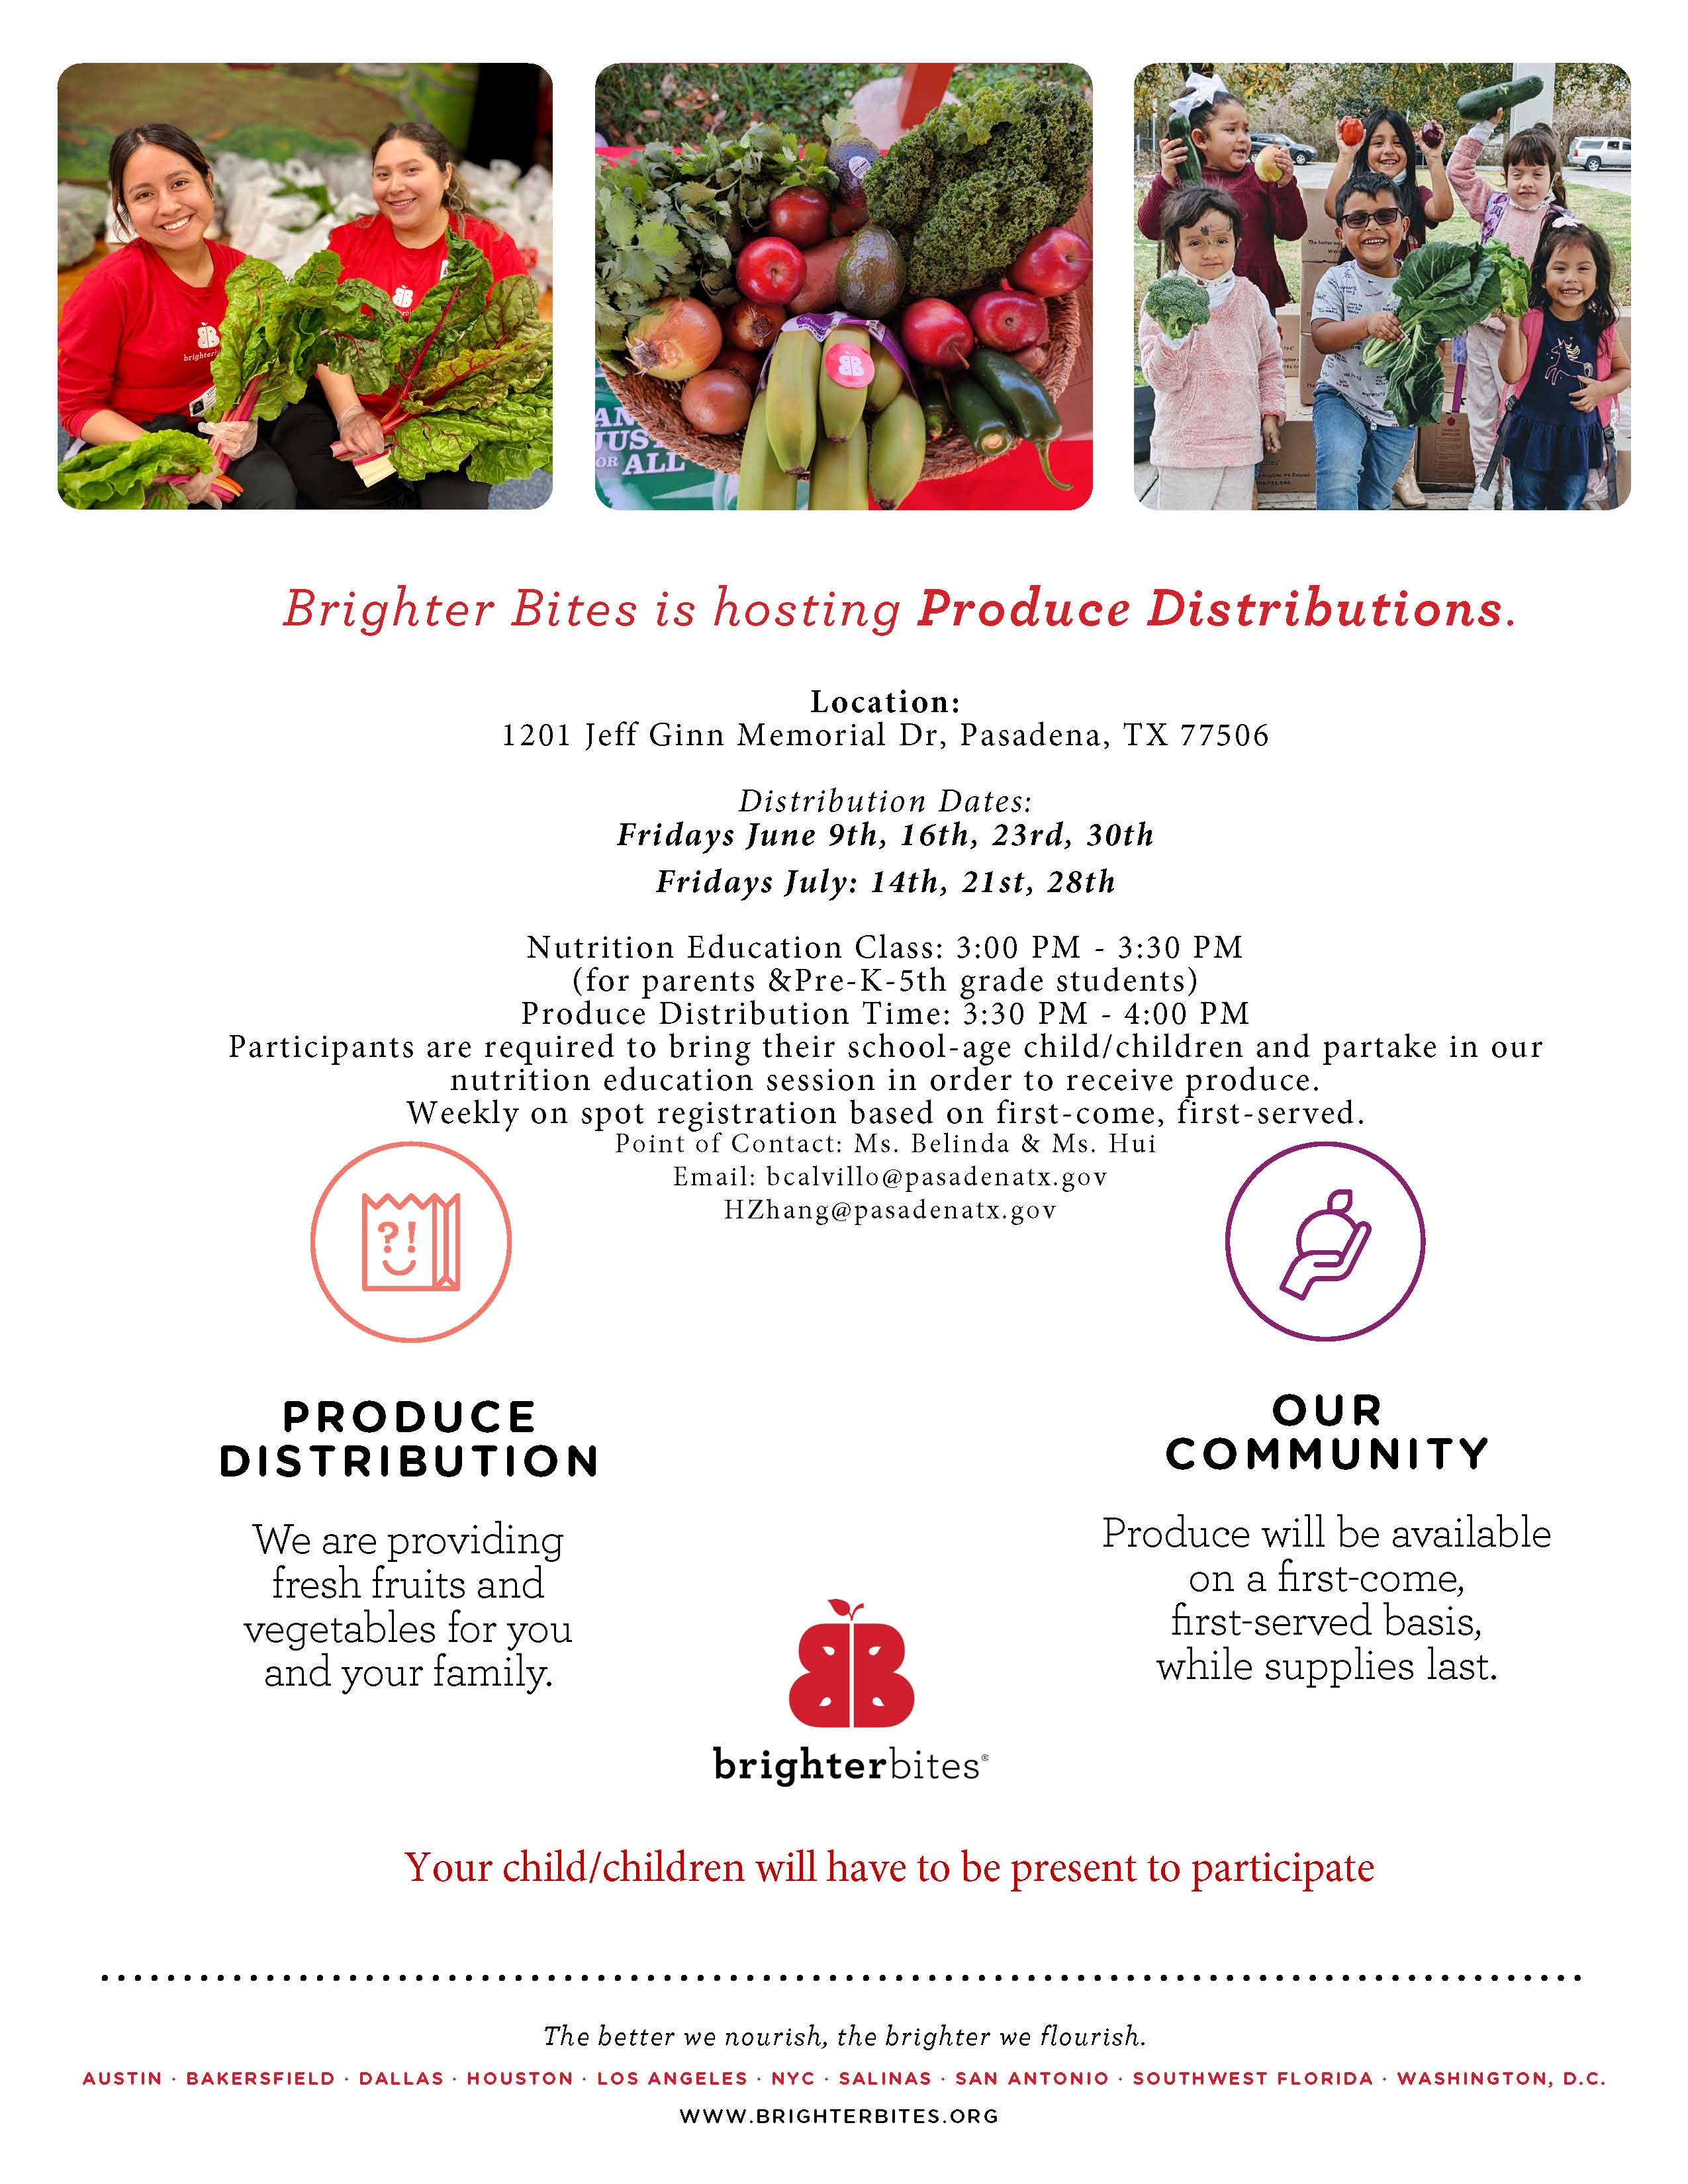 Brighter Bites is hosting Produce Distributions.  Location:1201 Jeff Ginn Memorial Dr, Pasadena, TX 77506 Distribution Dates: Fridays June 9th, 16th, 23rd, 30th & Fridays July: 14th, 21st, 28th